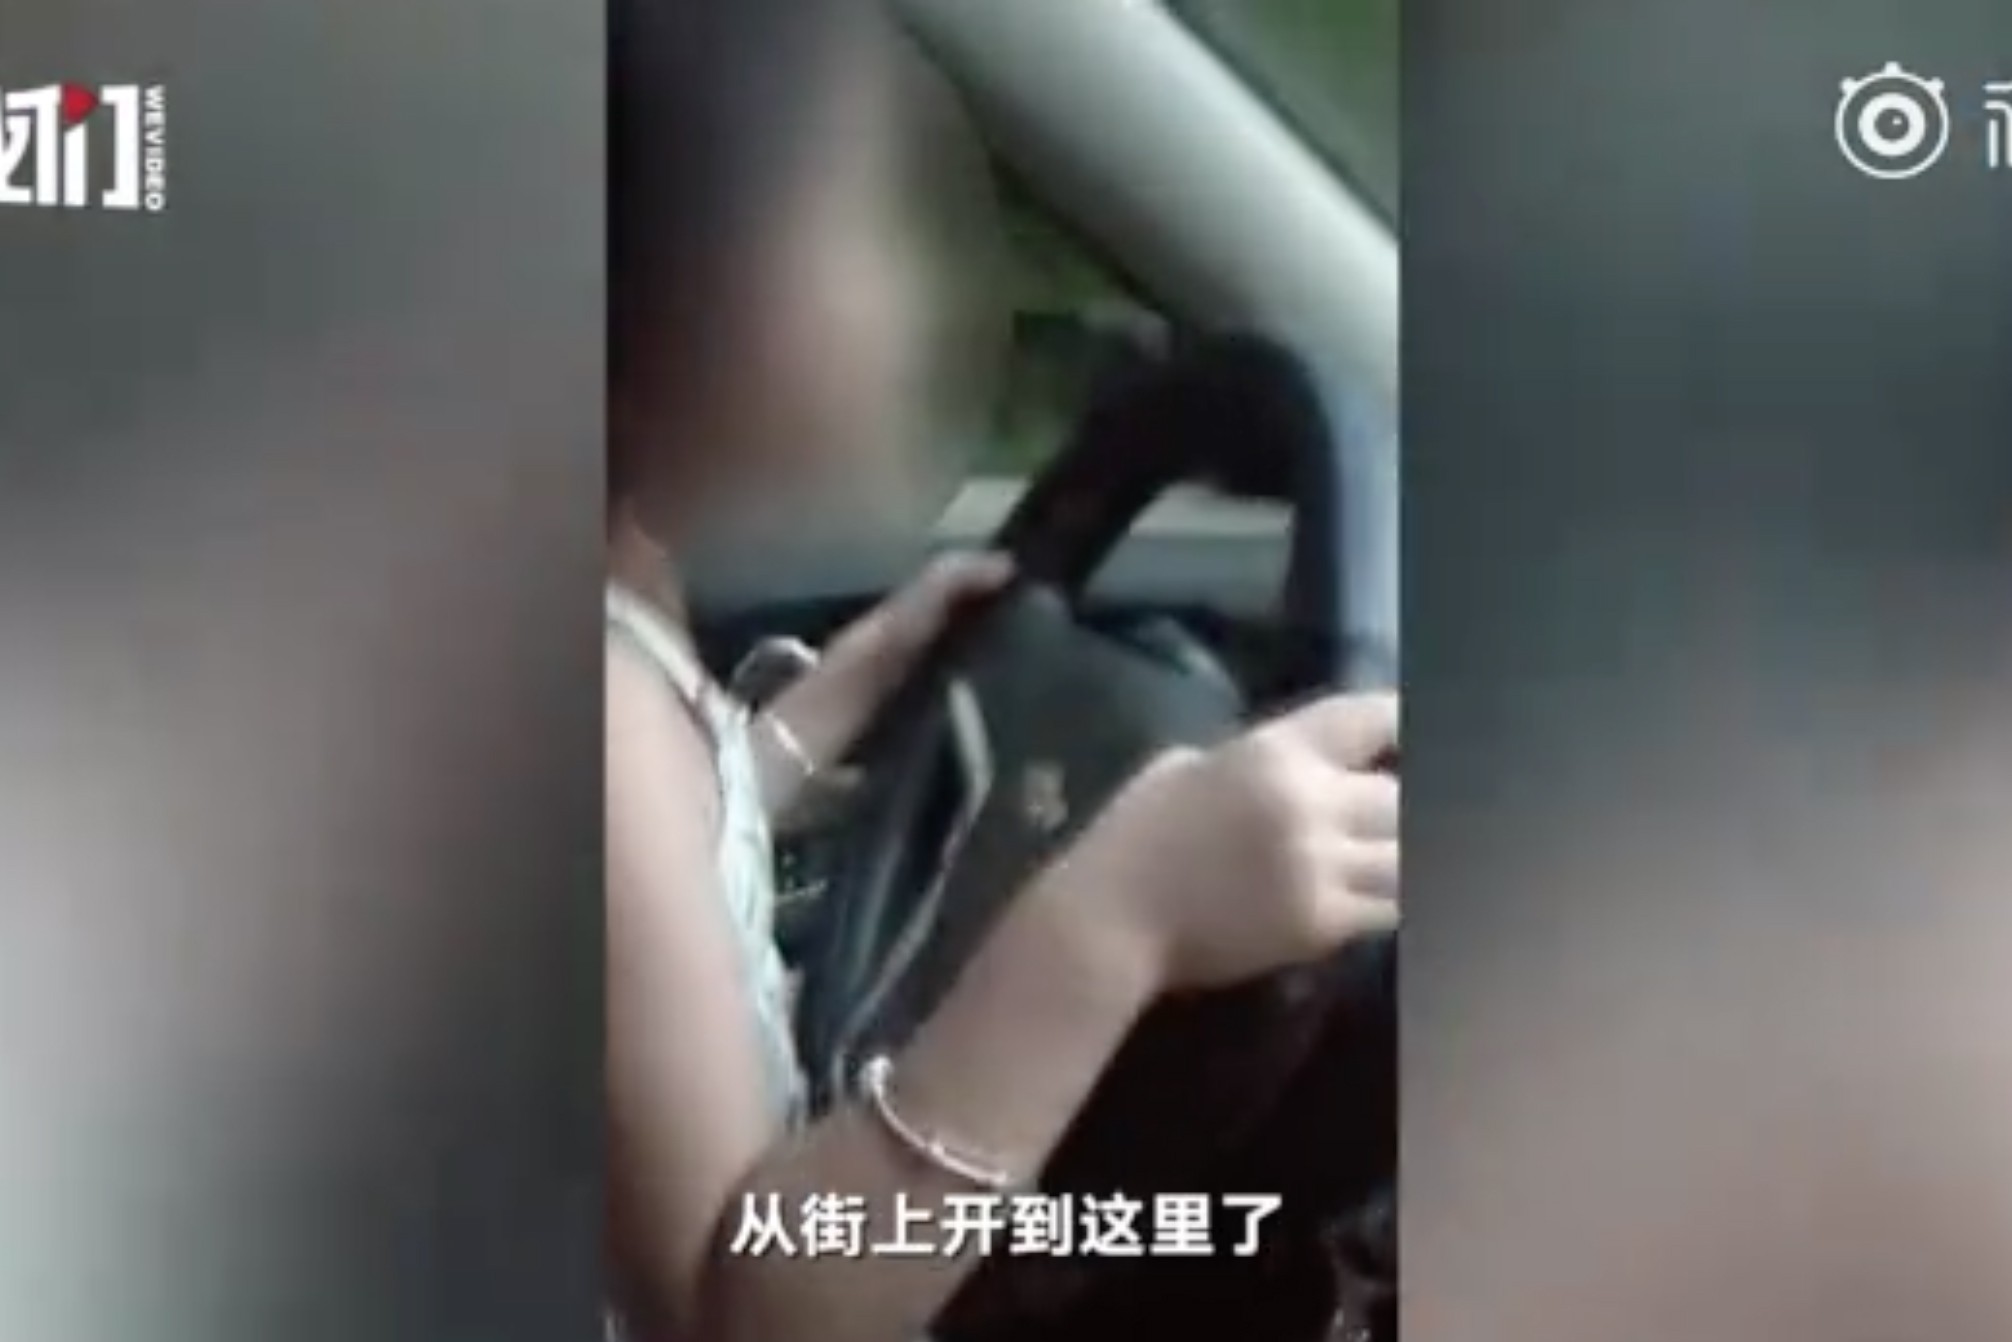 A couple from central China were detained and fined for allowing their six-year-old daughter steer their car. Source: Miaopai